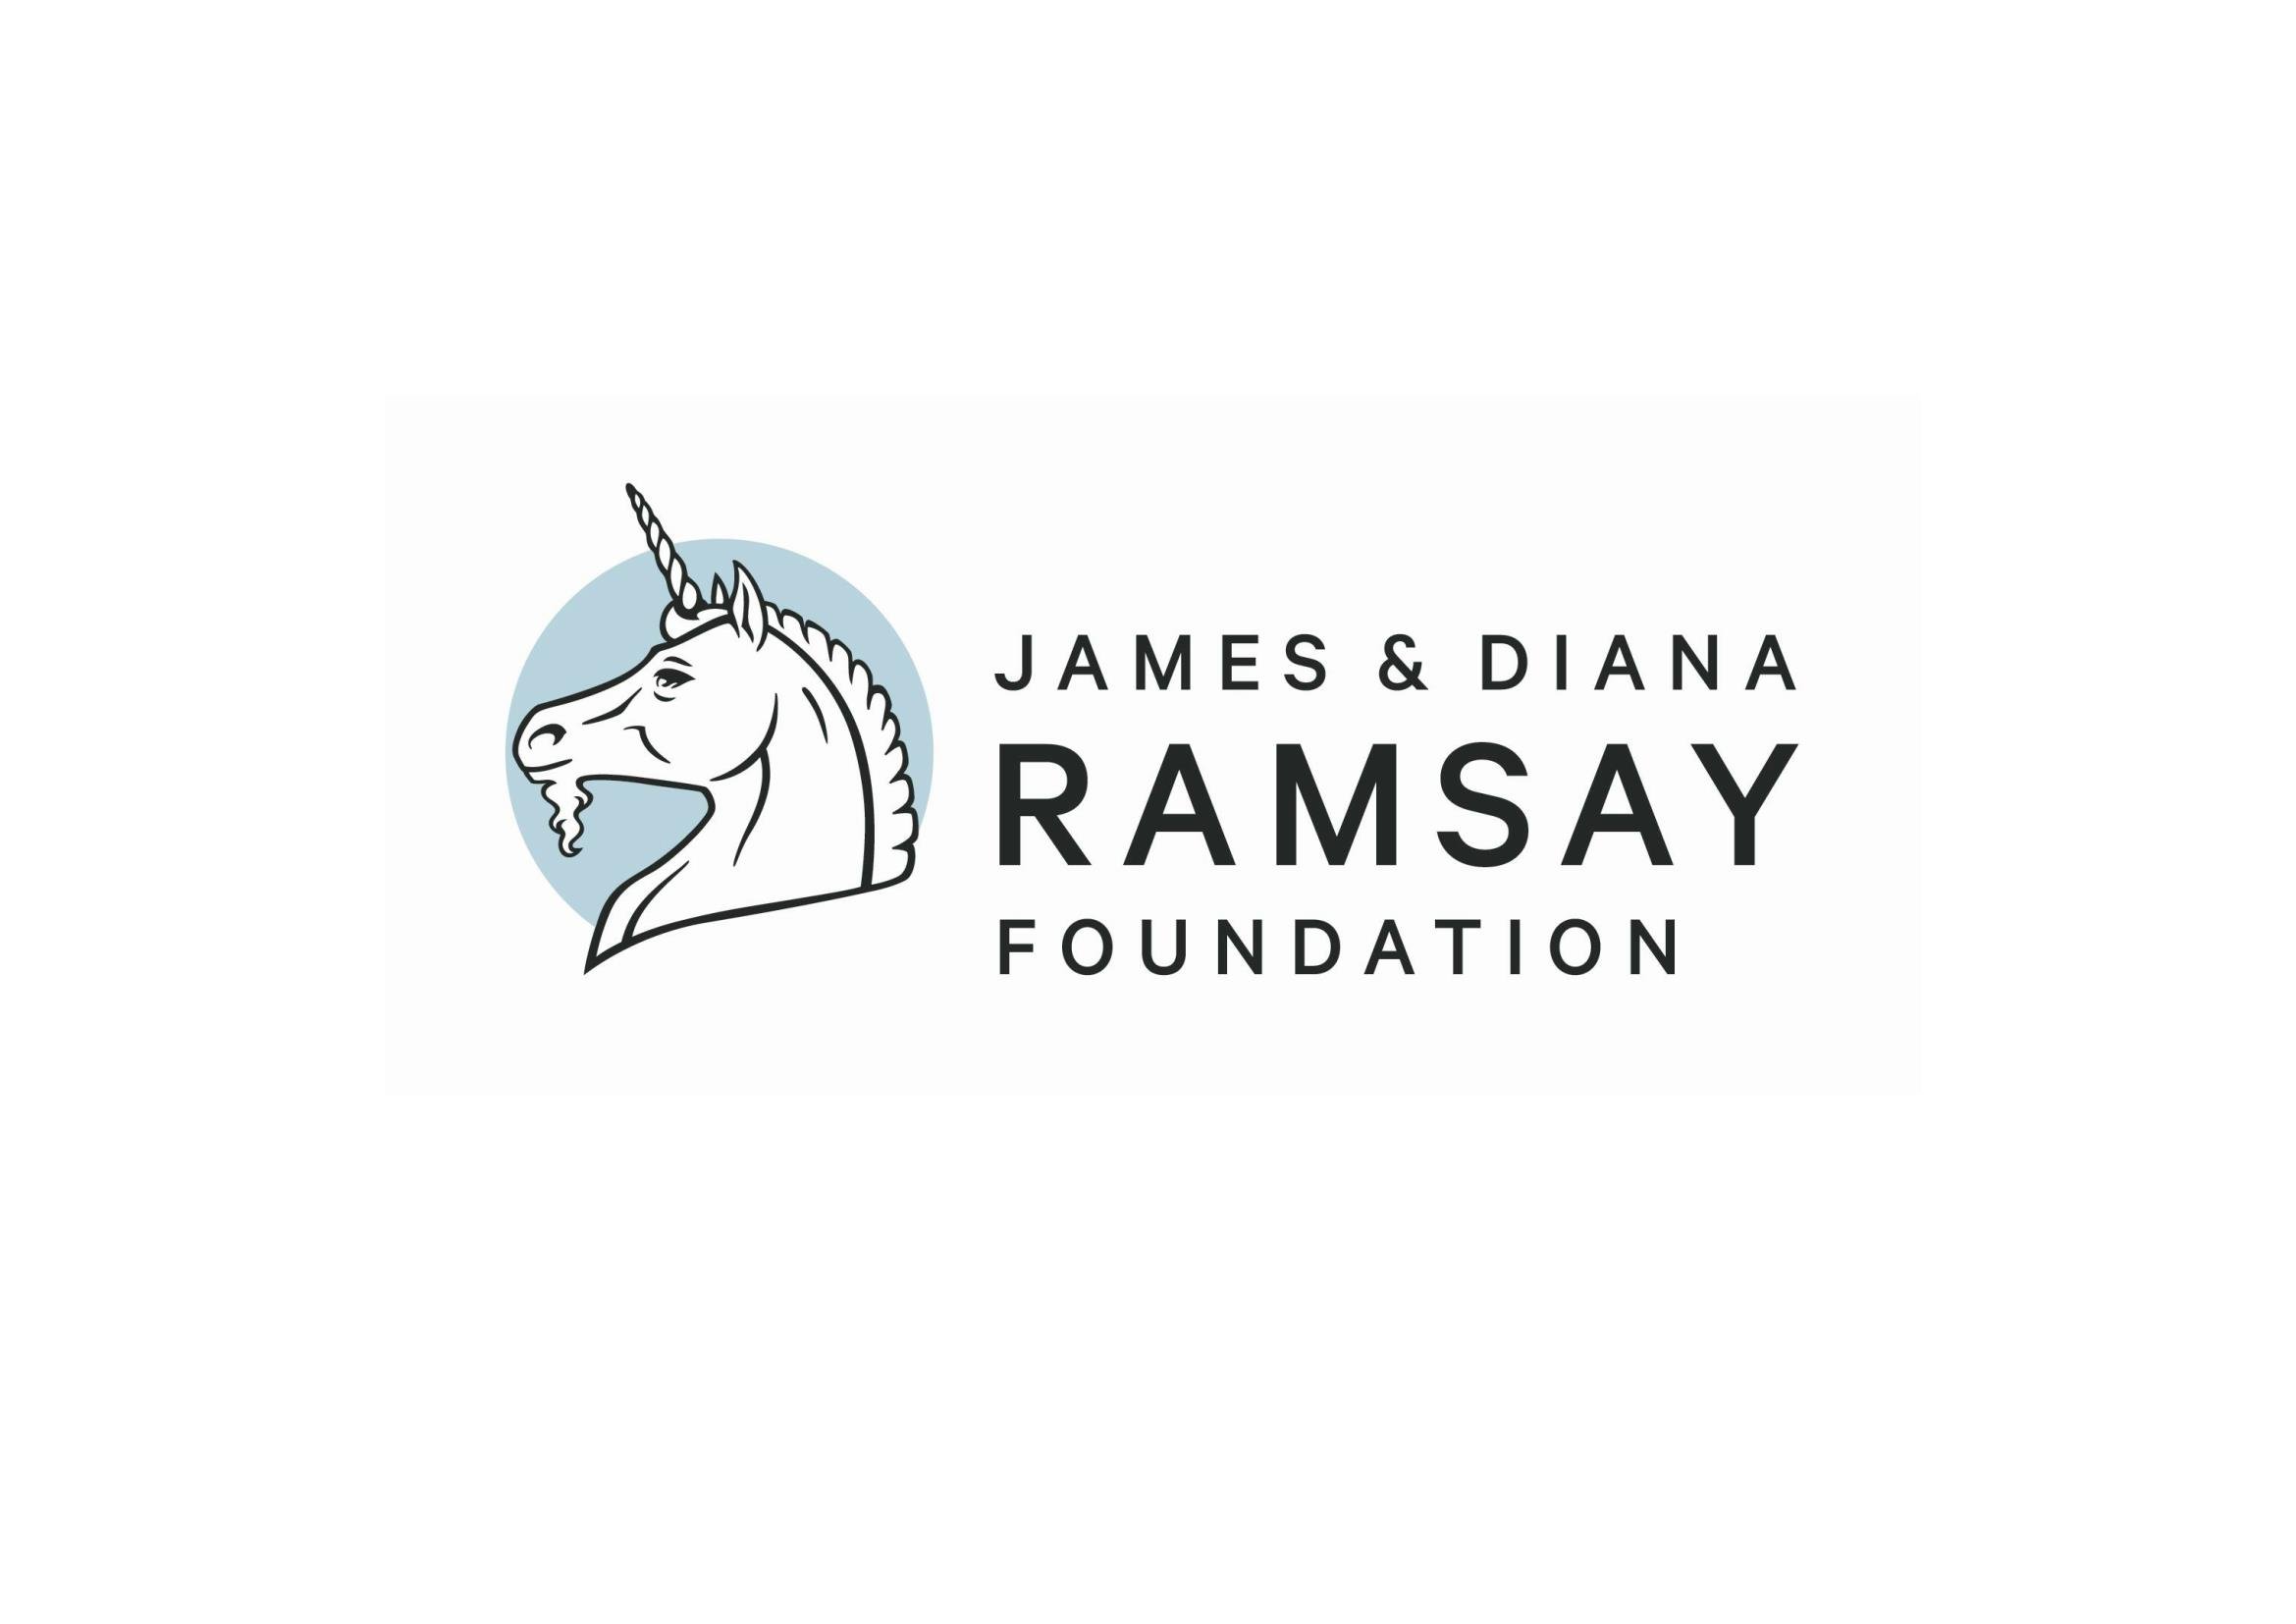 The James and Diana Ramsay Foundation was established in 2008 as a Private Ancillary Fund by Diana Ramsay AO.